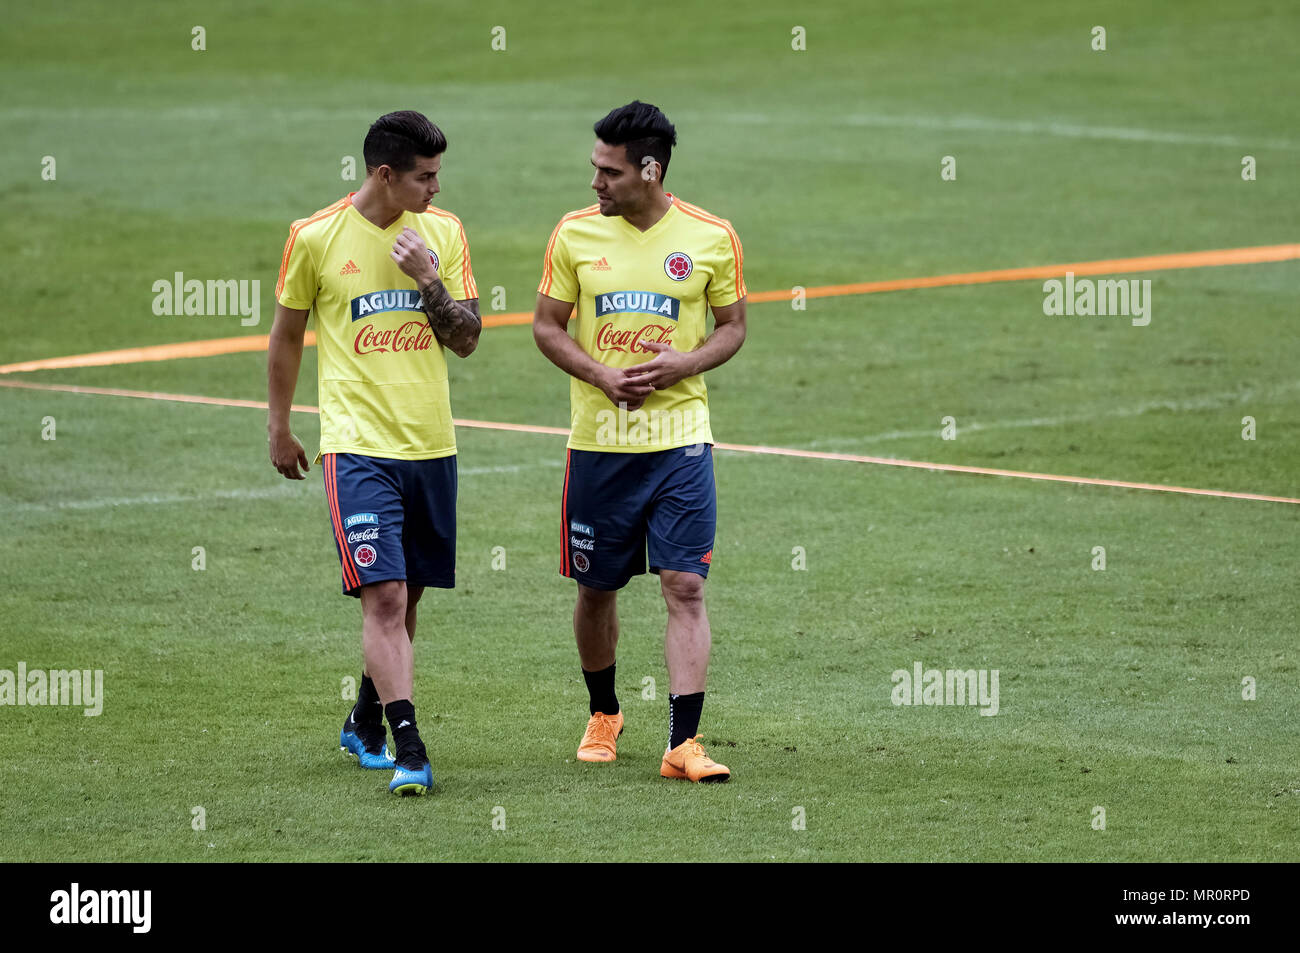 Bogota, Colombia. 24th May, 2018. James Rodriguez (L) and Radamel Falcao of Colombia's national soccer team take part in a training session before the Russia 2018 FIFA World Cup finals, in Bogota, capital of Colombia, on May 24, 2018. Credit: Jhon Paz/Xinhua/Alamy Live News Stock Photo